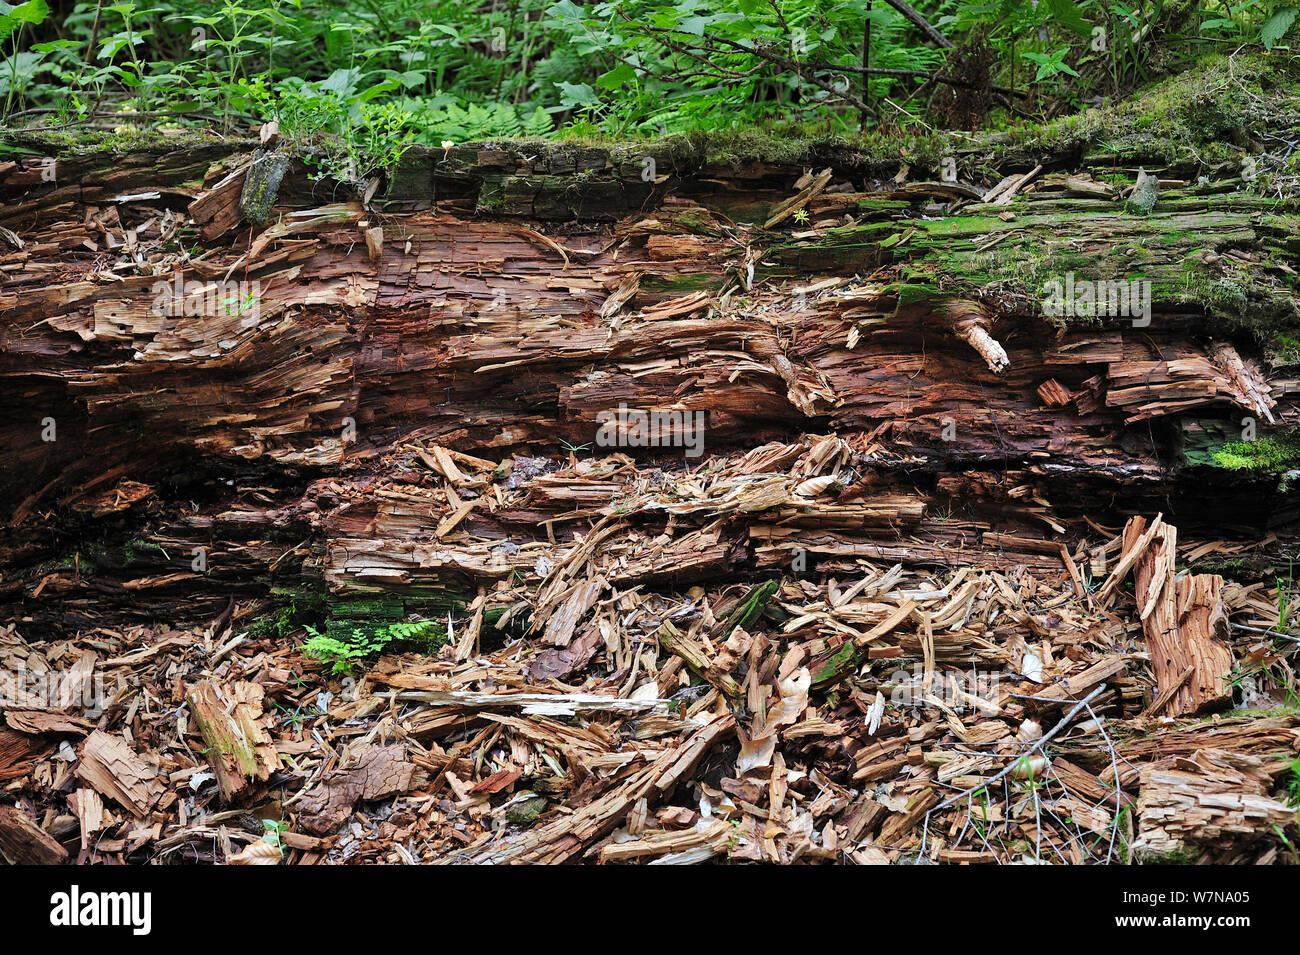 Fallen tree trunk left to rot on forest floor as dead wood habitat for invertebrates, Pyrenees, France Stock Photo